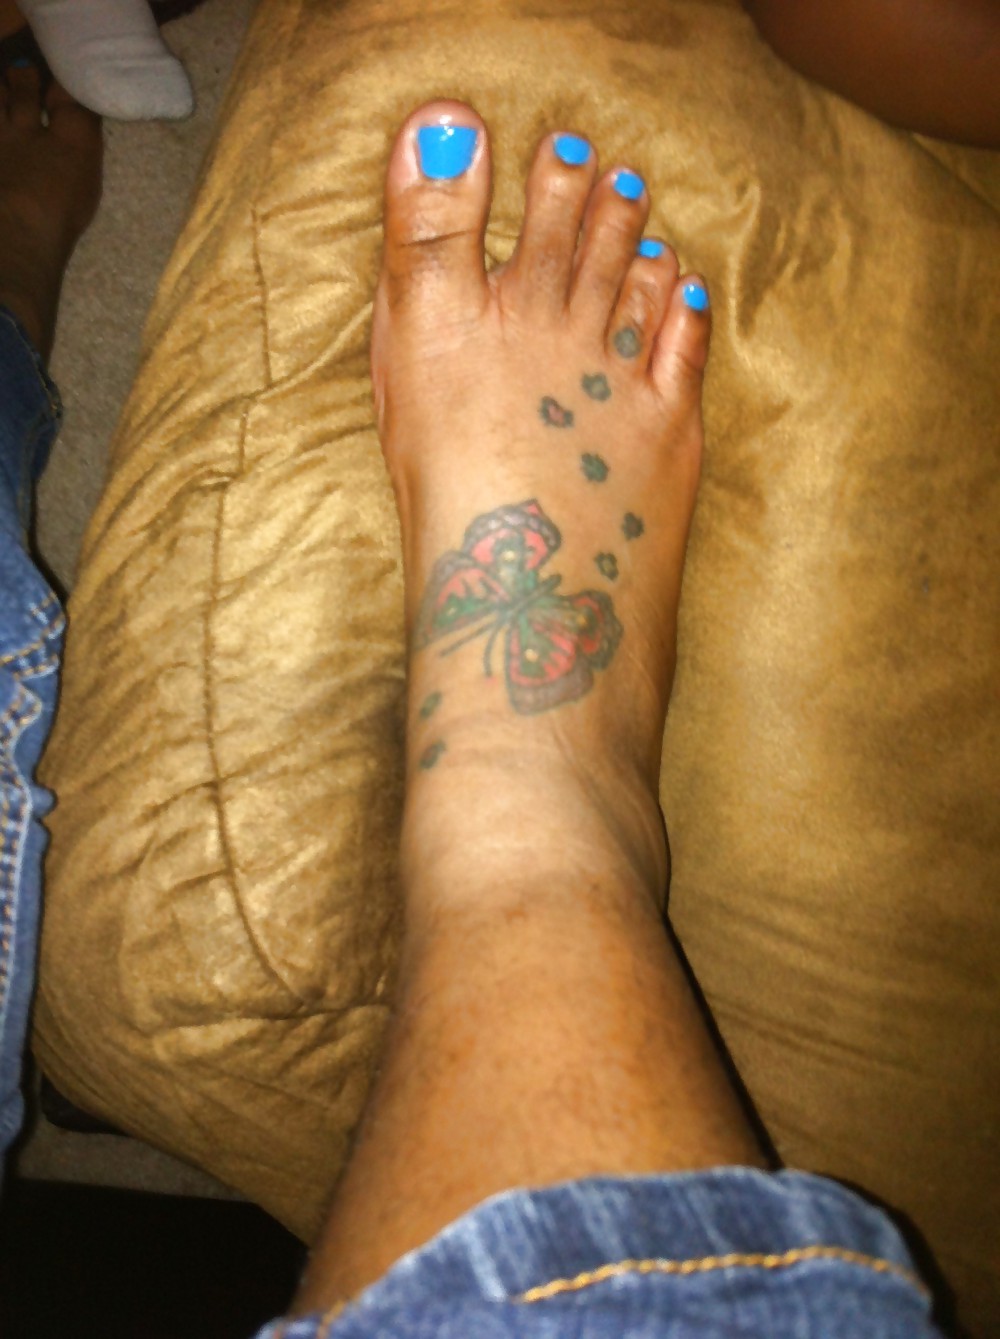 New Blue Painted Toes from a Freind #19895112